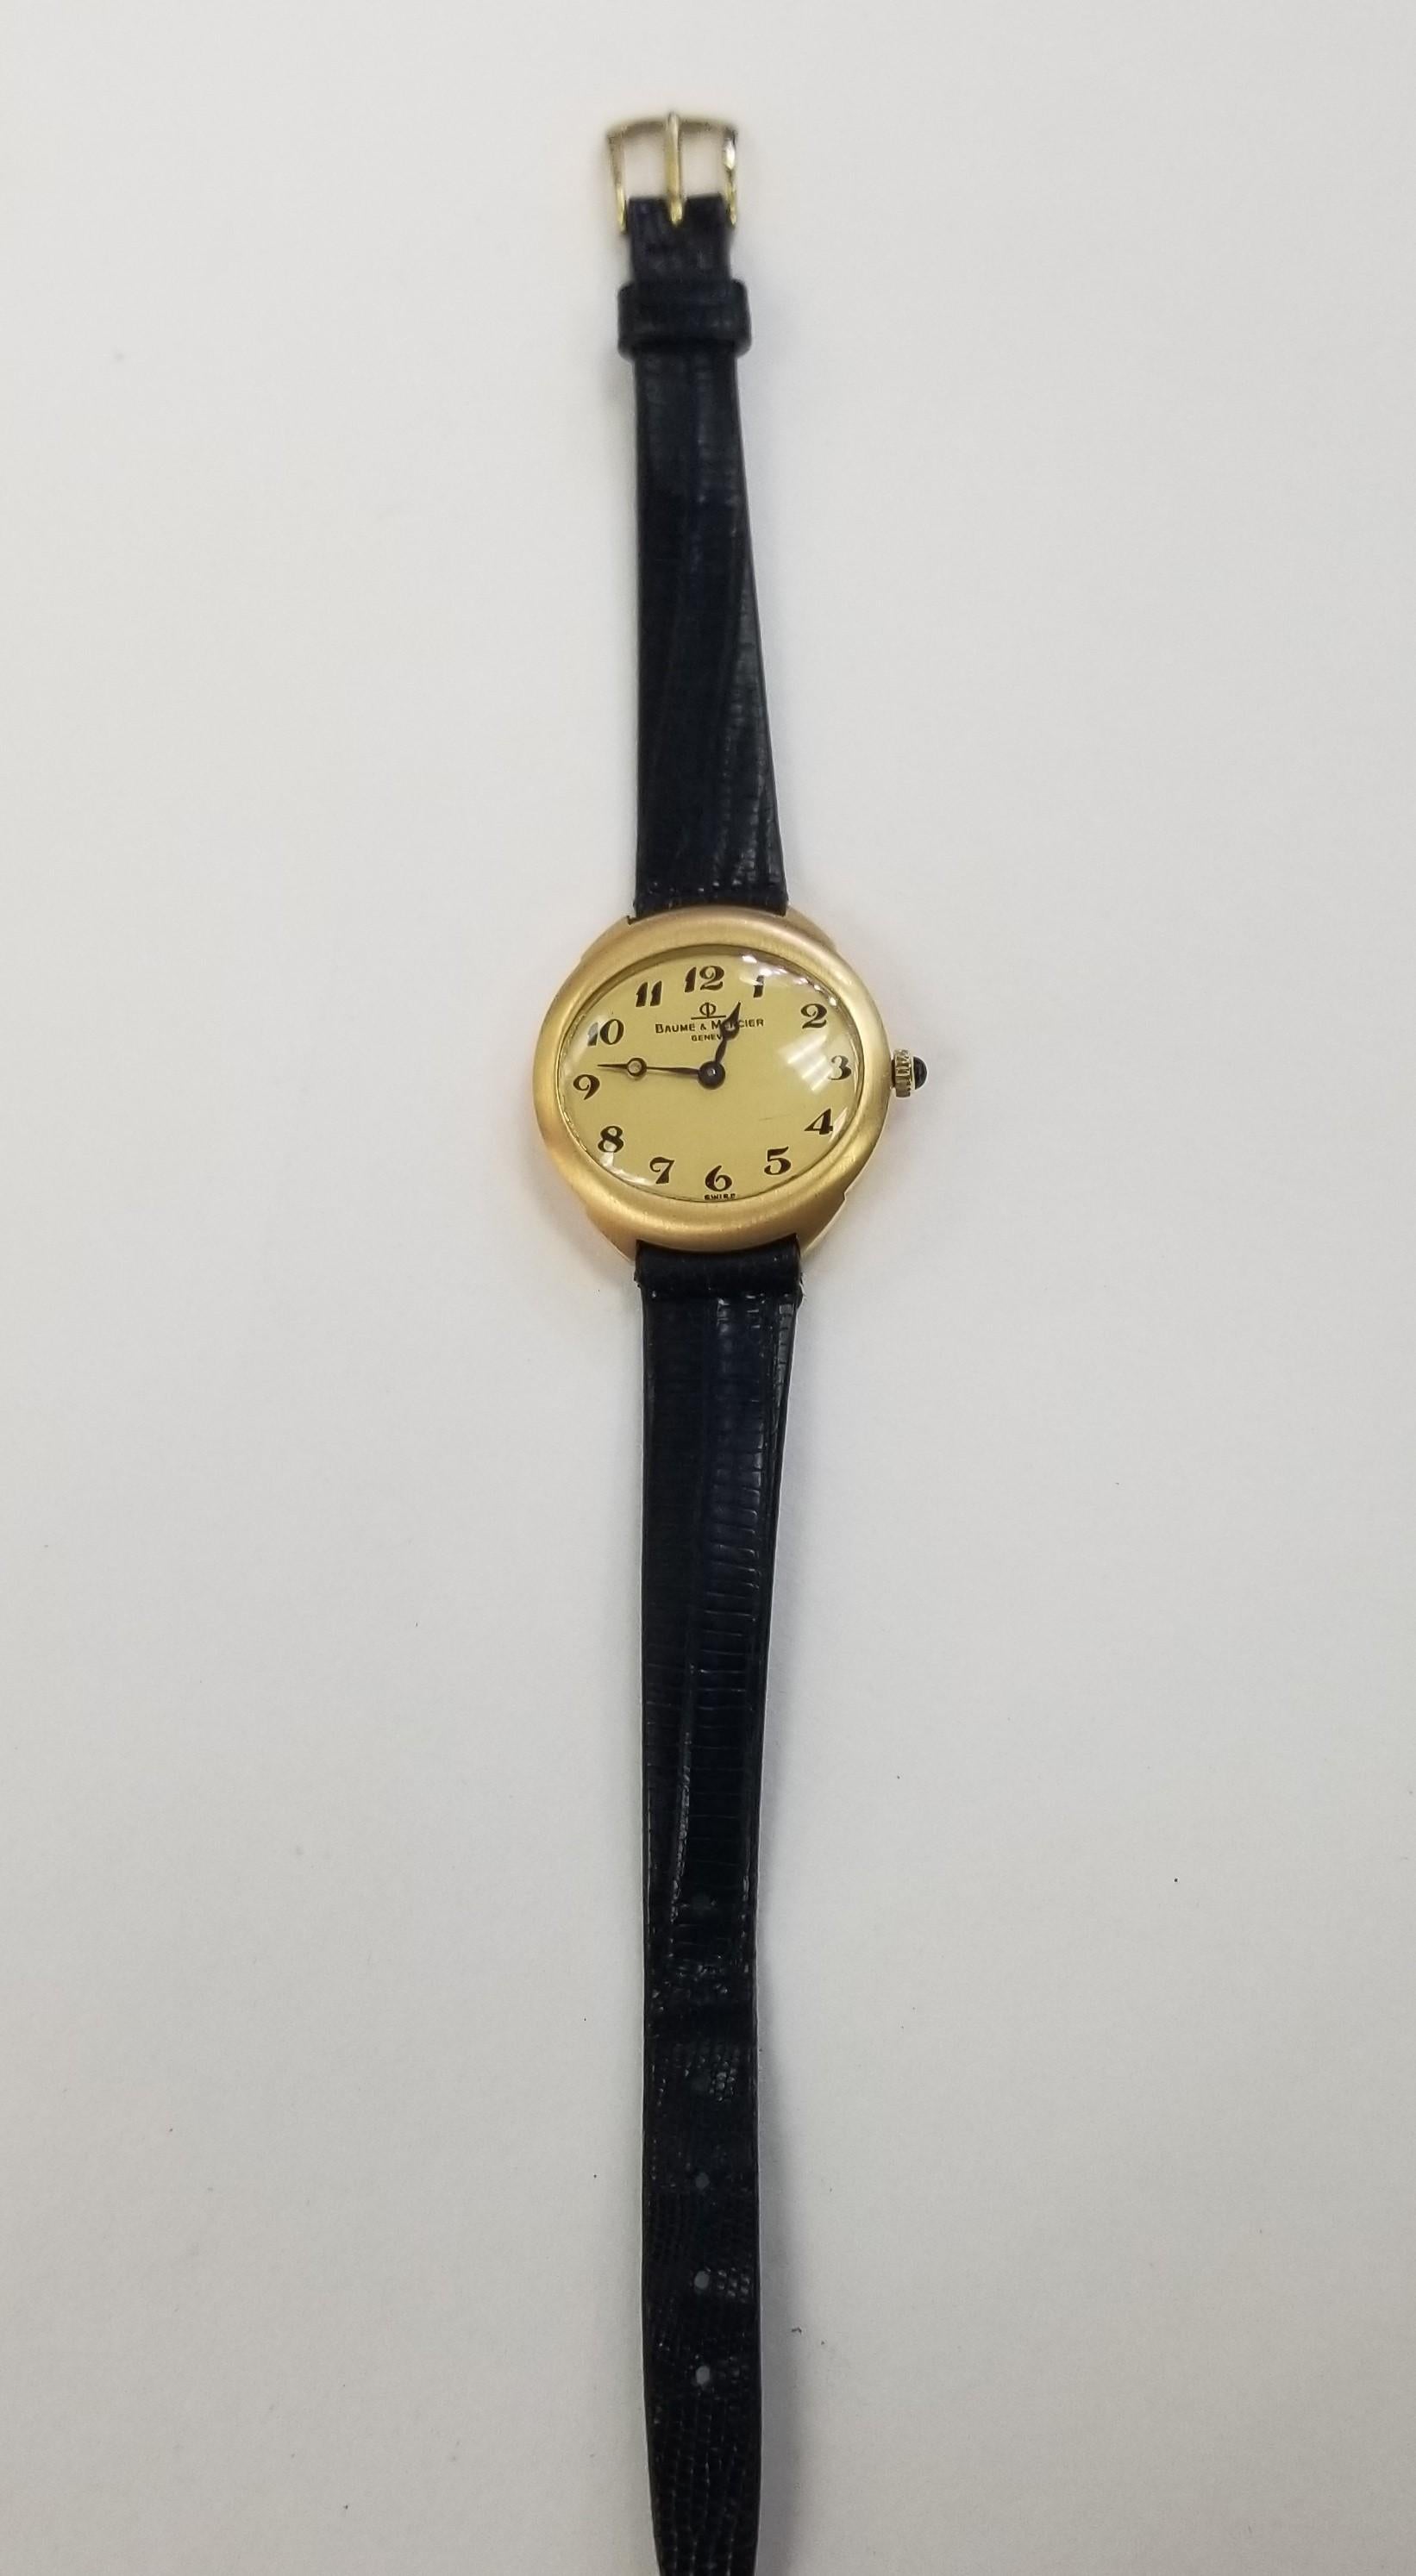 A 27mm yellow gold Ladies Baume & Mercier wristwatch. Featuring a stunning a gold dial with Arabic numbers. The watch is fitted with a sapphire glass, movement and a Baume & Mercier black leather strap. 

This timepiece comes with our own